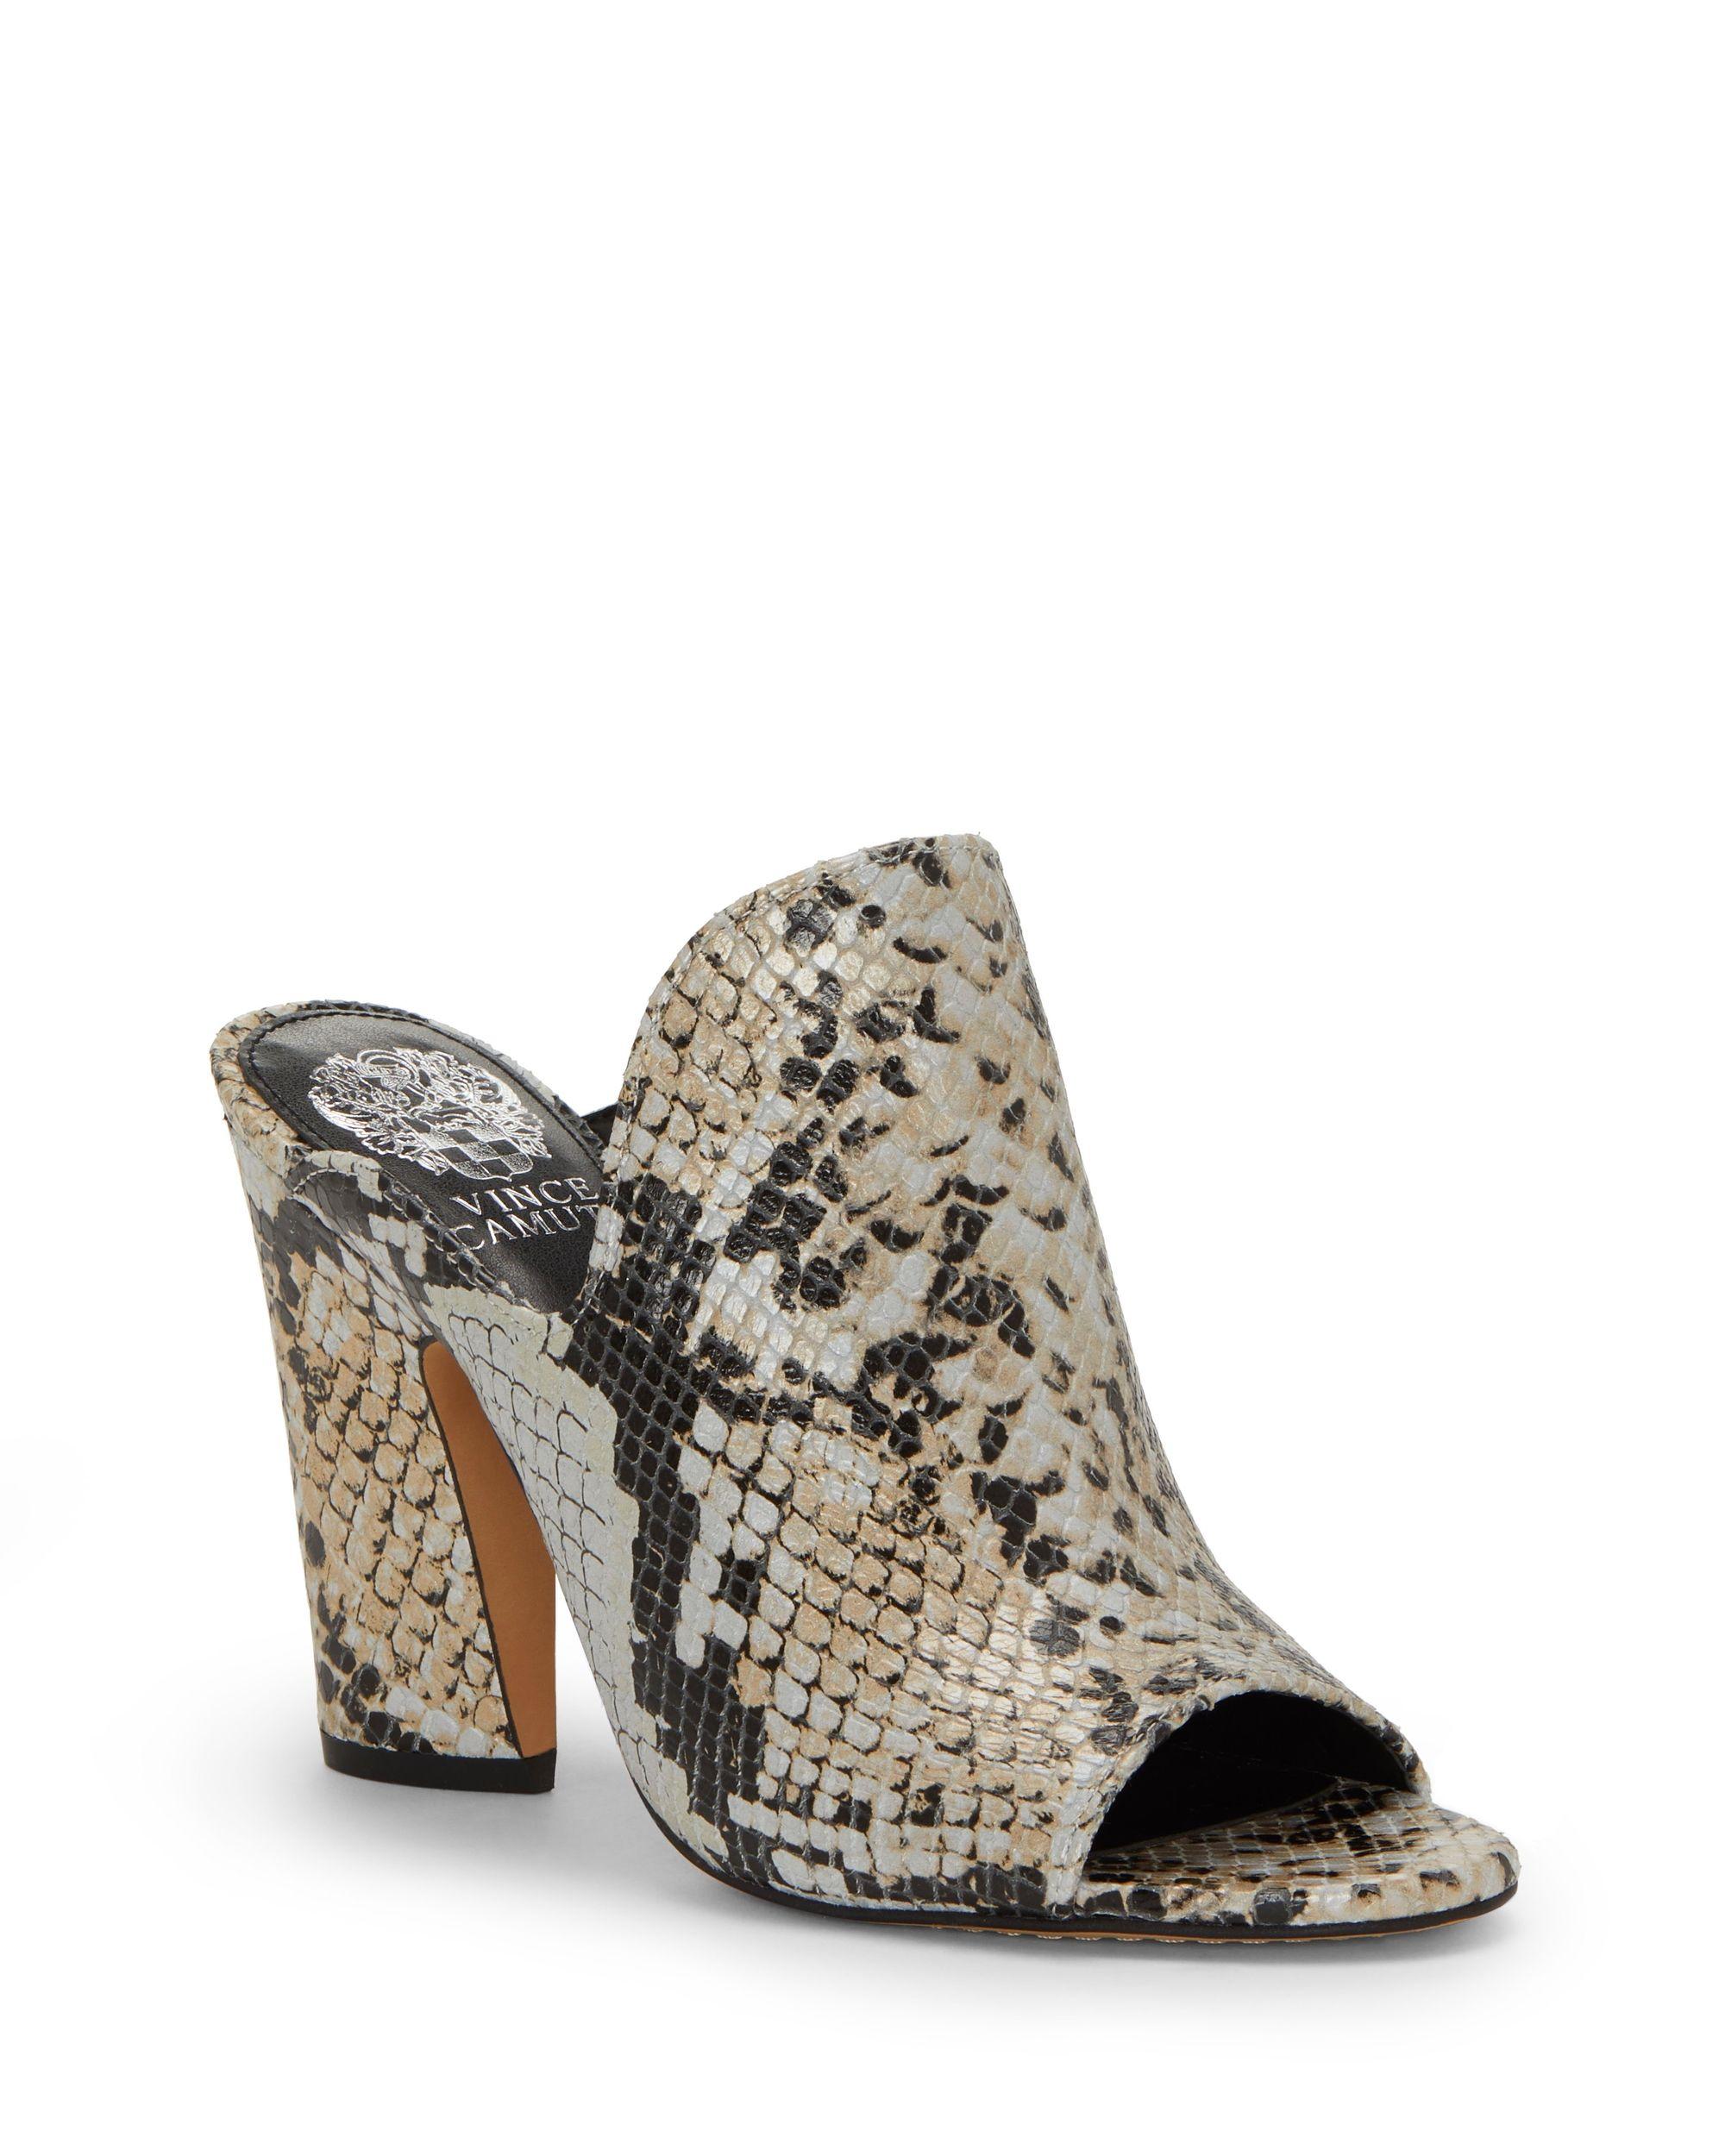 vince camuto gerrty